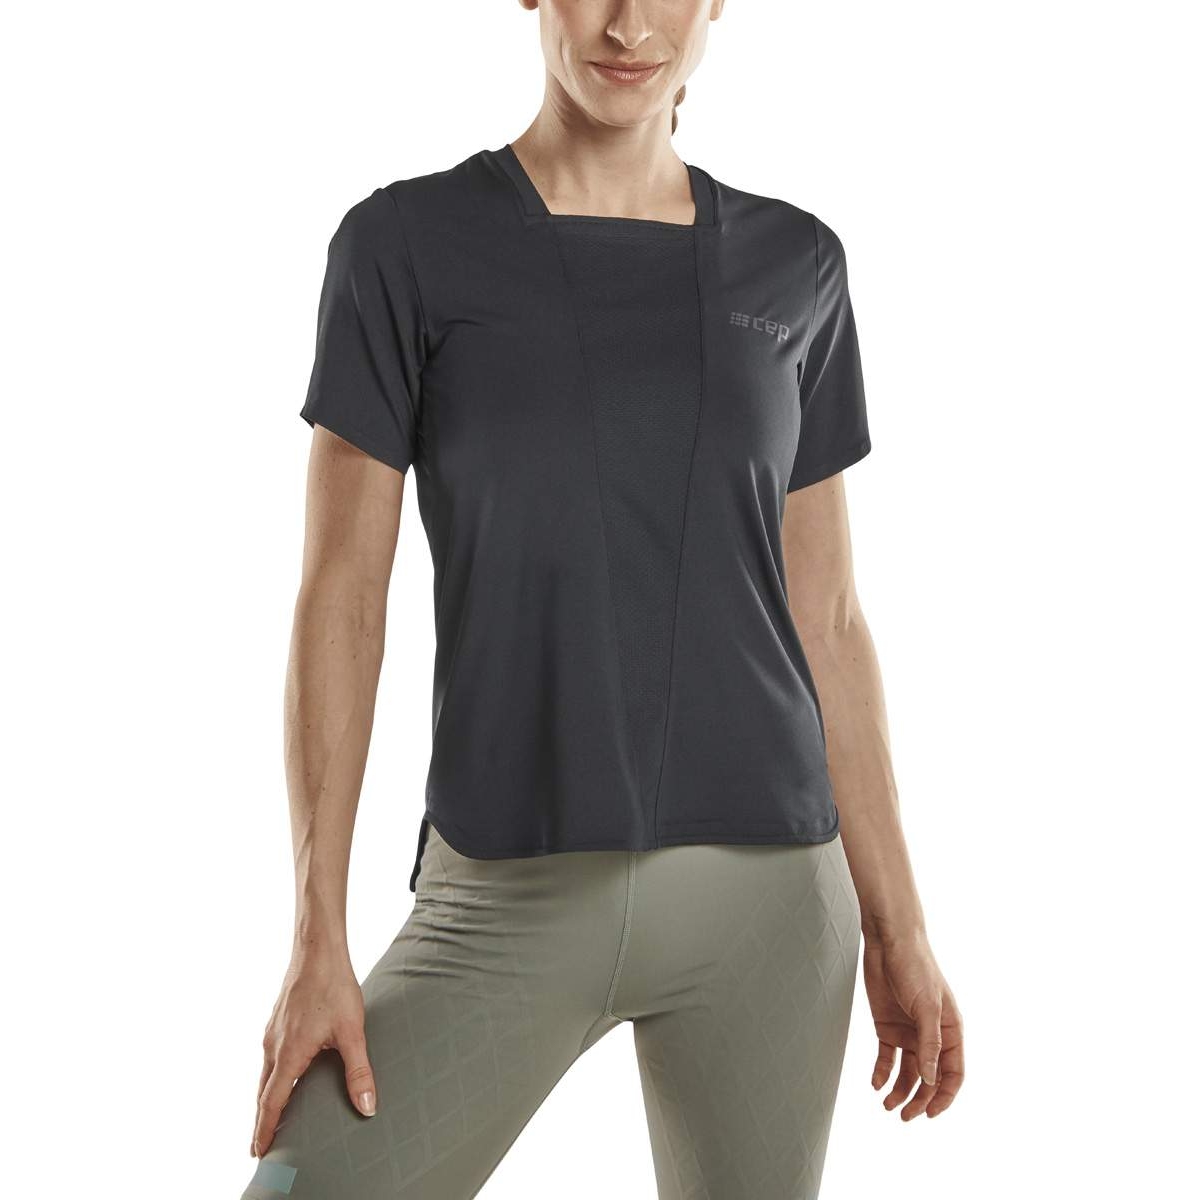 Picture of CEP The Run T-Shirt Women - black